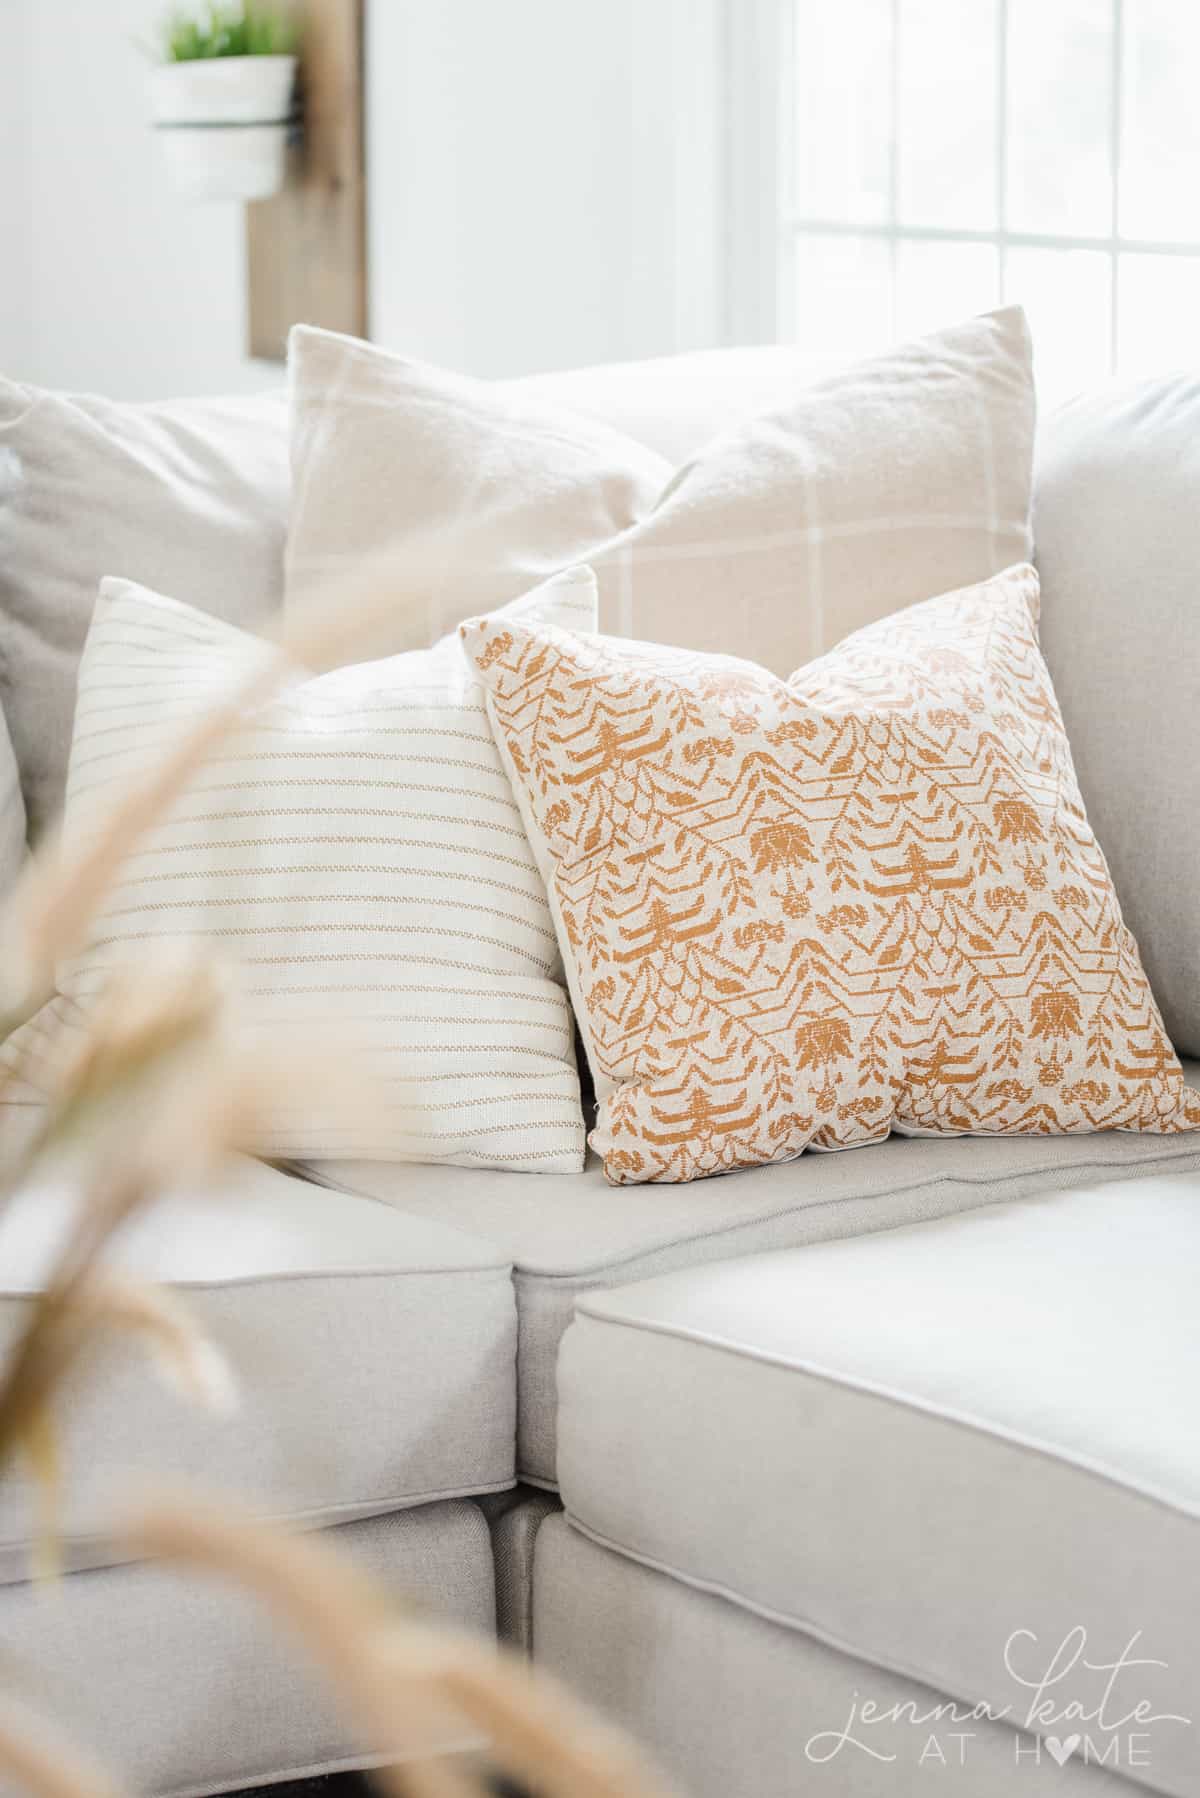 A close up shot of the three pillows arranged on the sectional in the living room